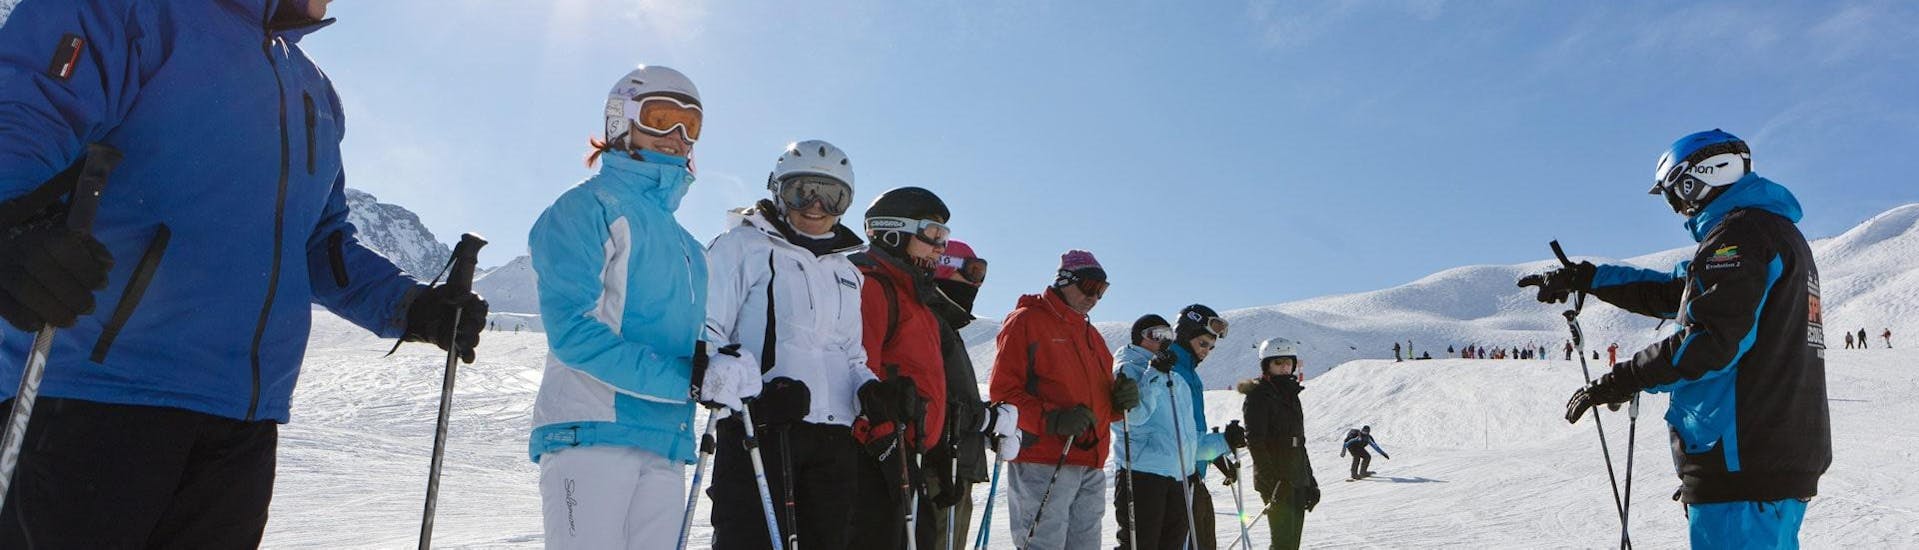 Adults are participating to Adult Ski Lessons for All Levels - Arc 1950 with Evolution 2 Spirit - Arc 1950 & Villaroger.